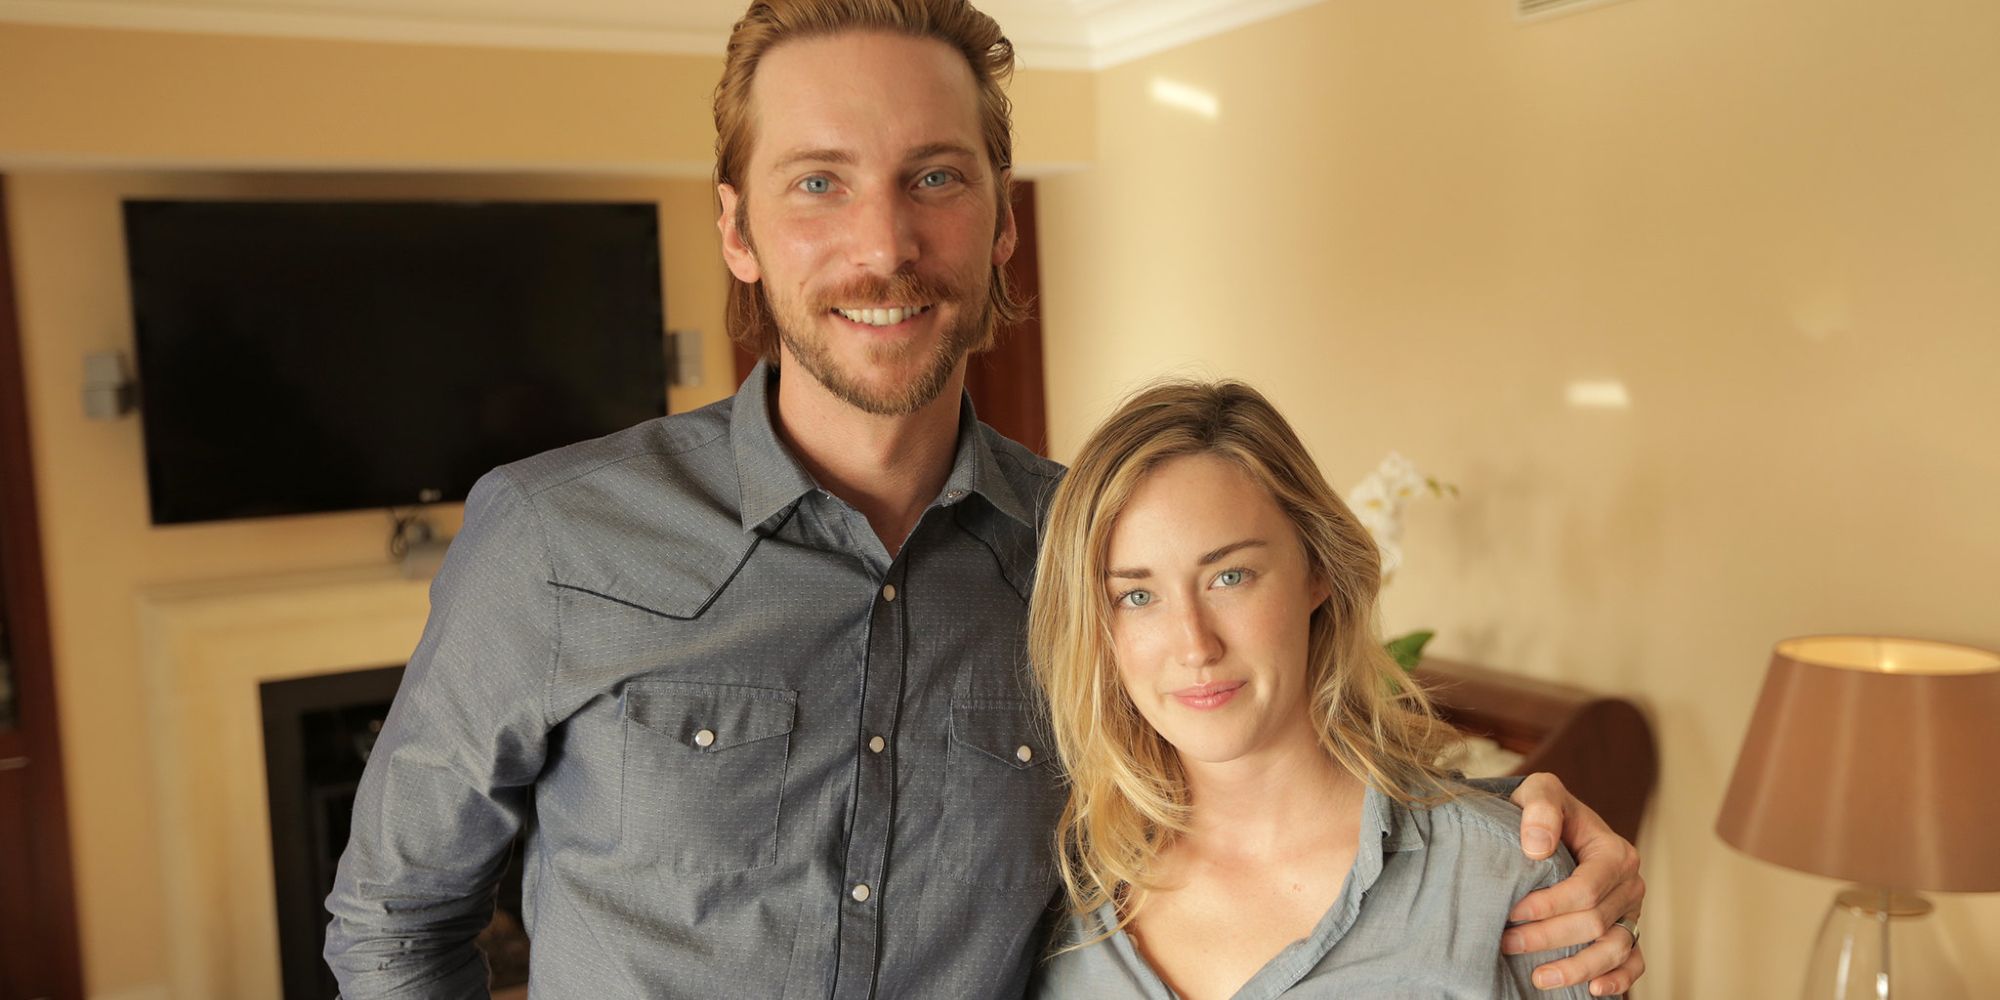 Is Troy Baker in the 'Last of Us' HBO Show? What to Know